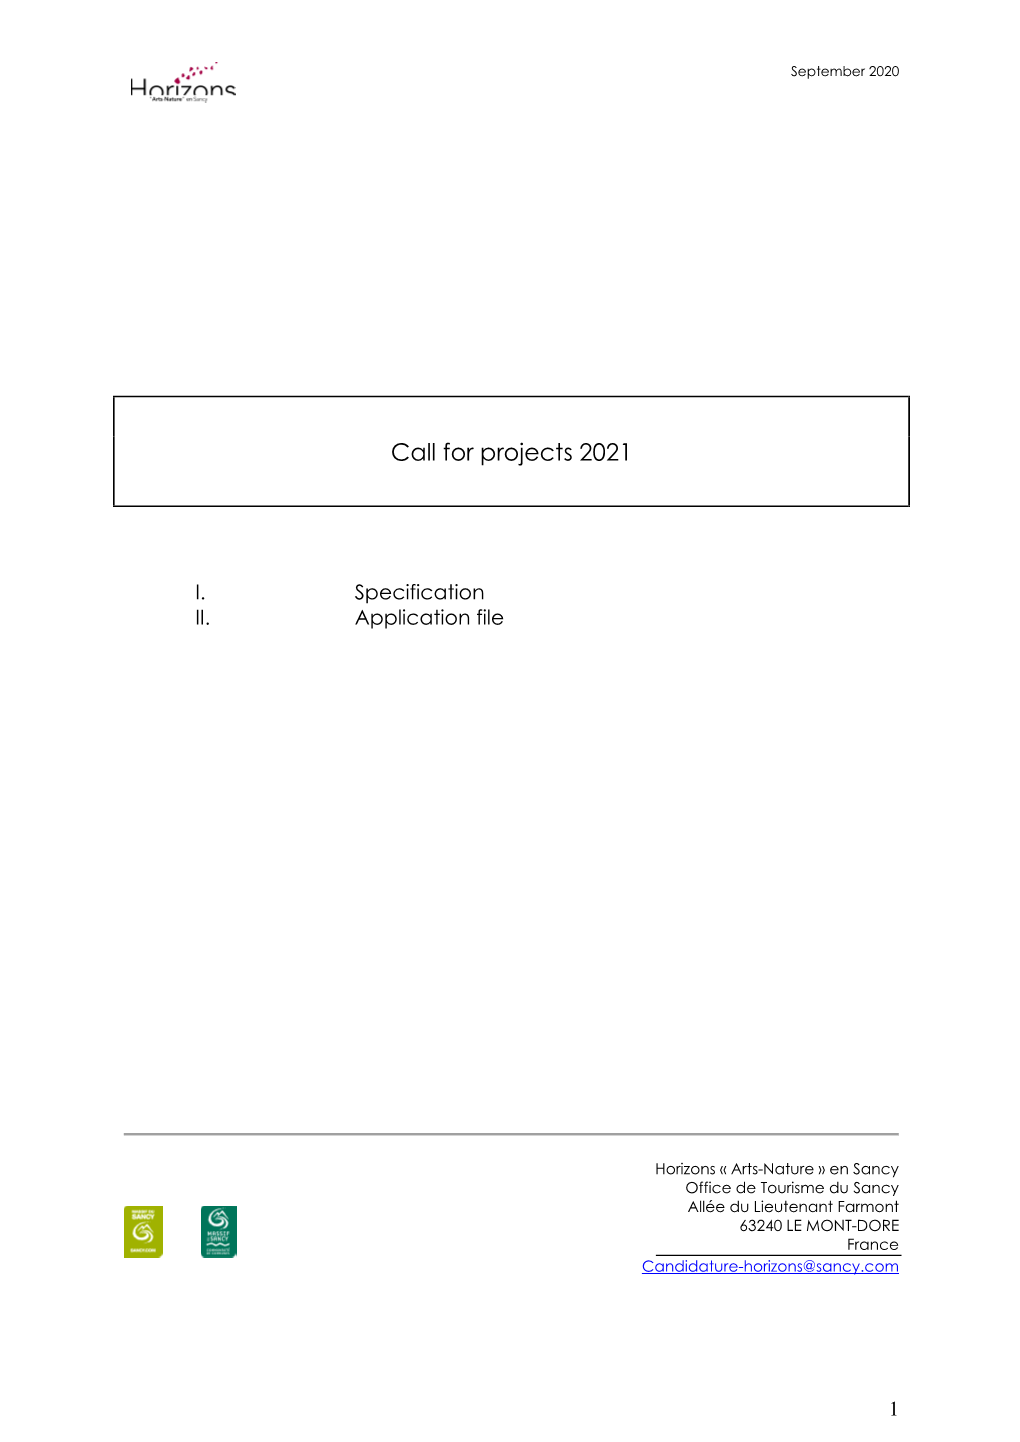 Call for Projects 2021